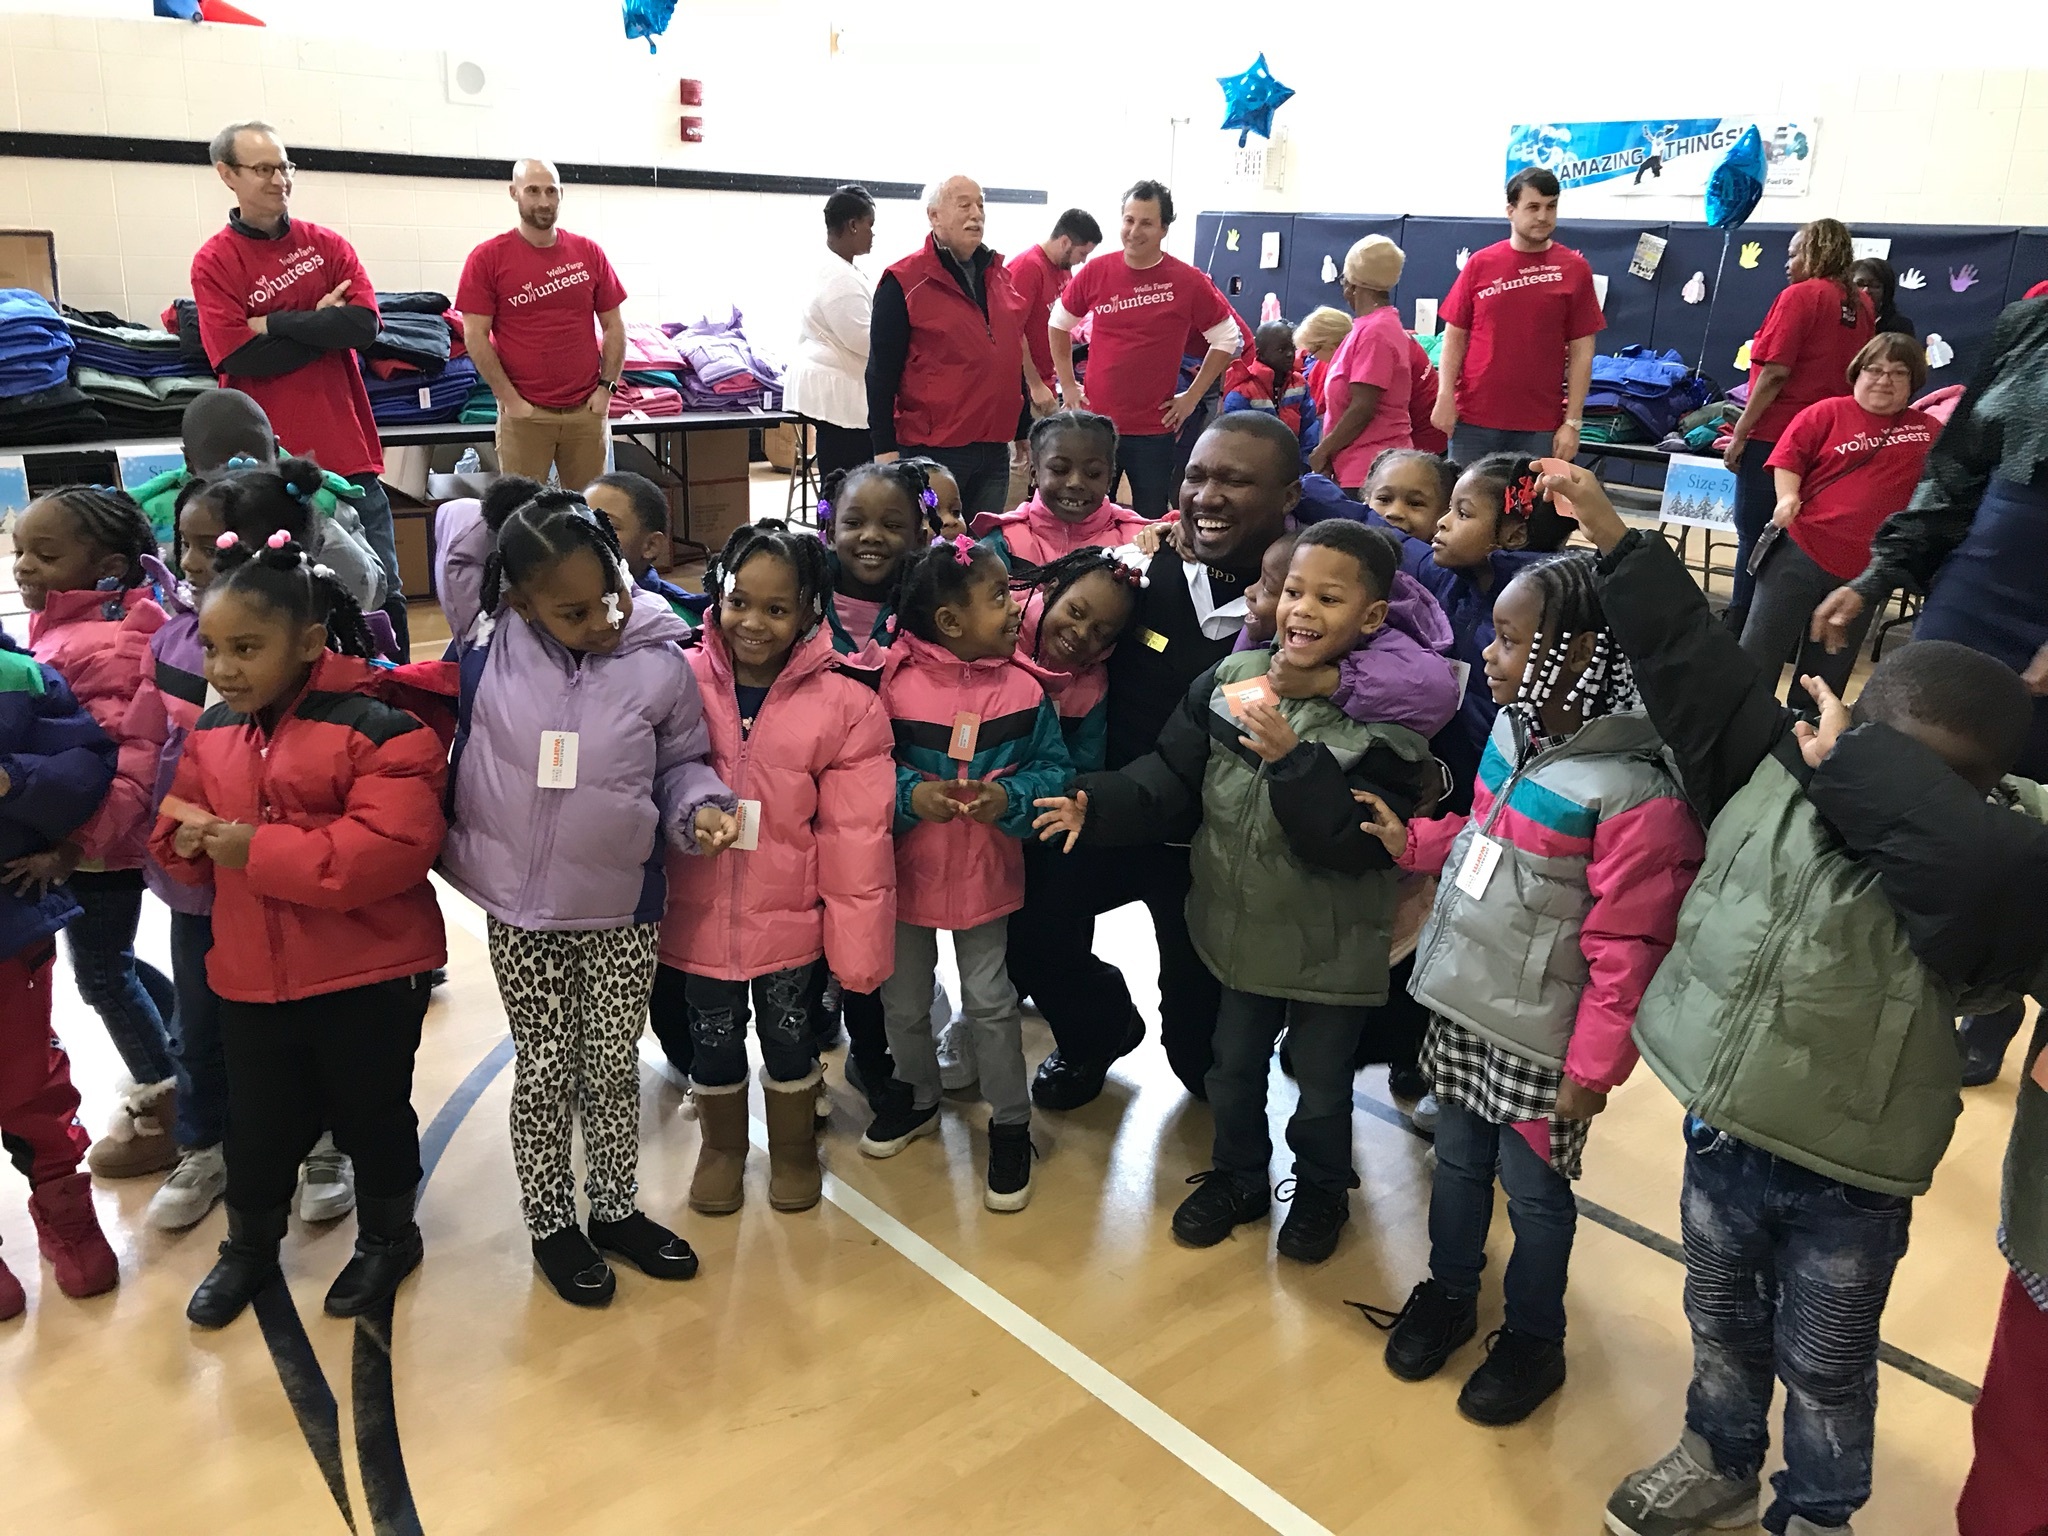 Wells Fargo Provides Winter Coats to More Than 10,000 Chicago